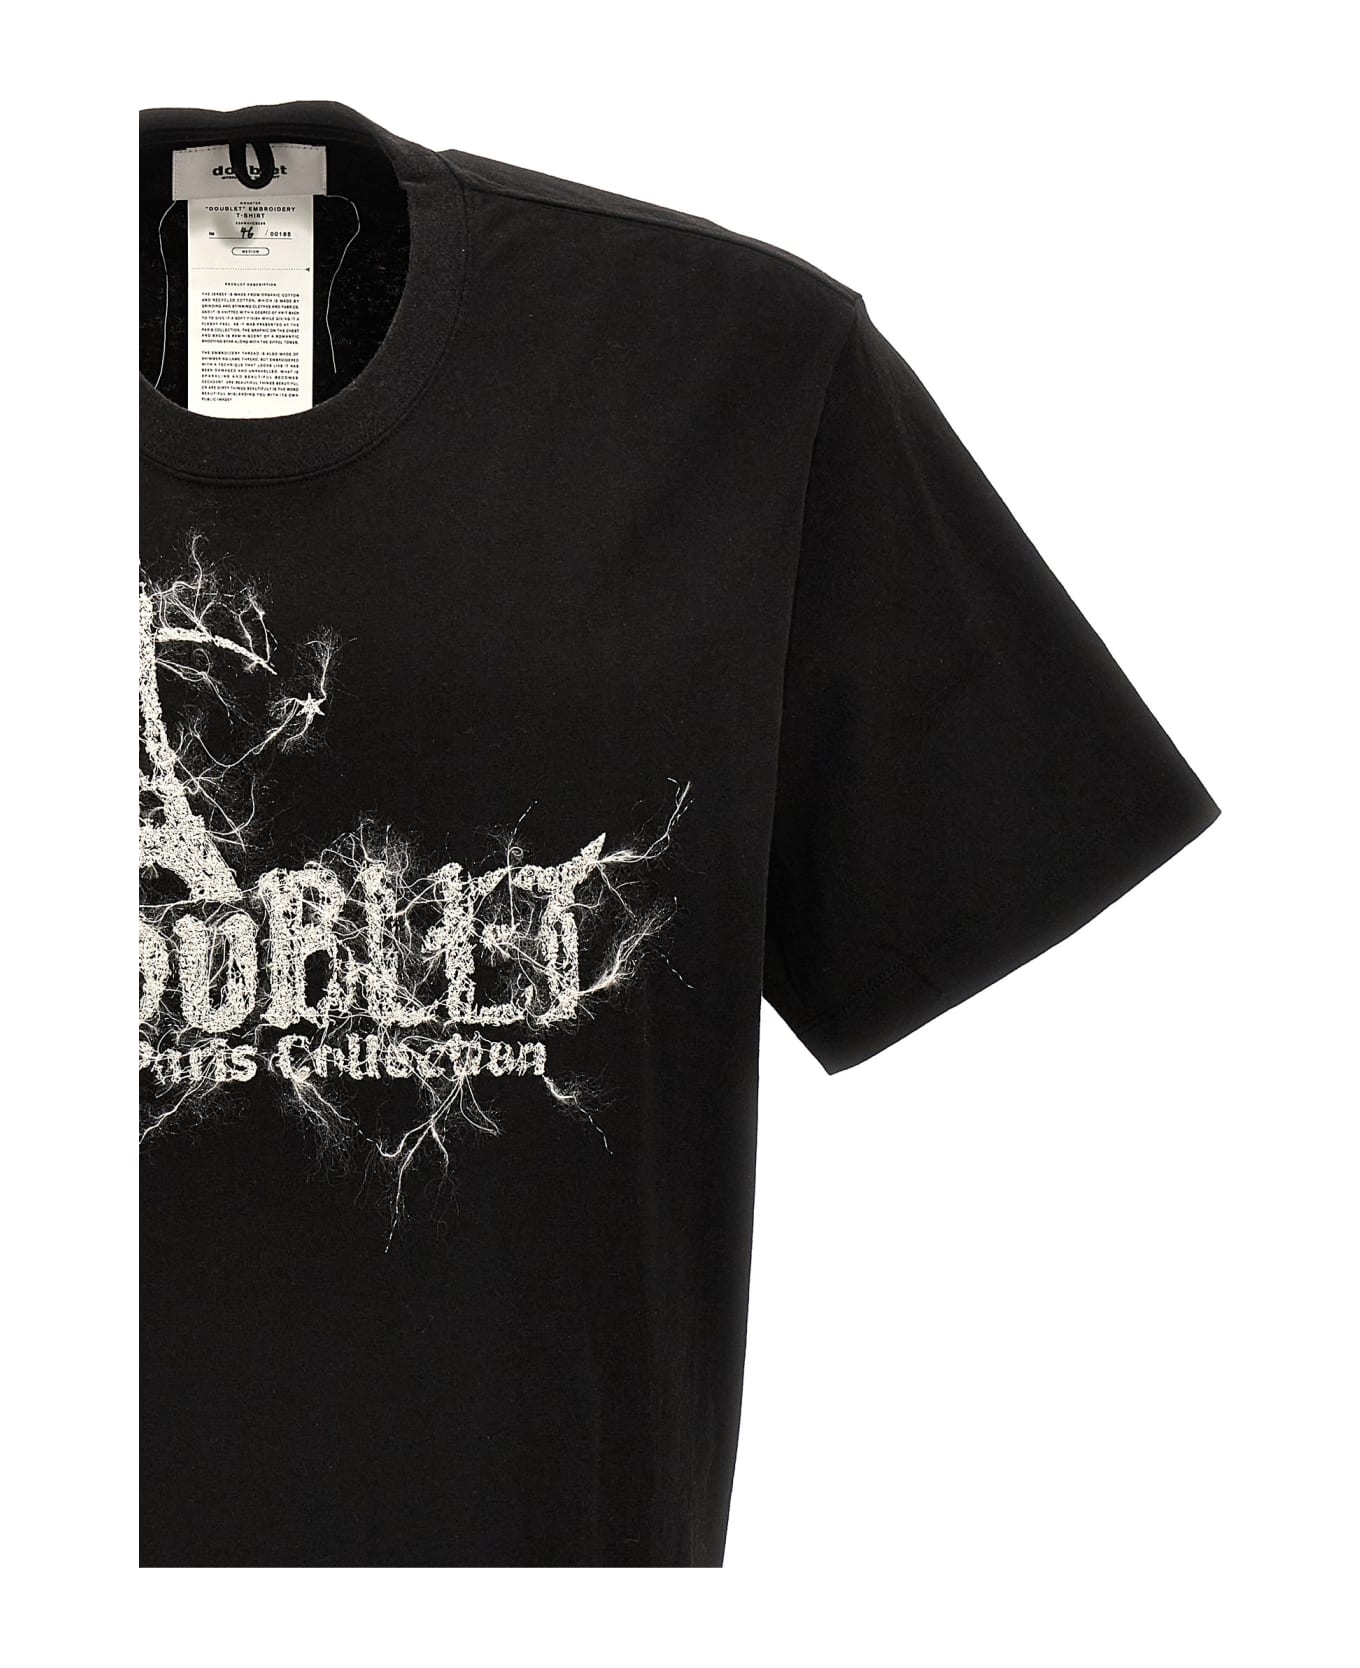 doublet Logo Embroidery T-shirt - Black  